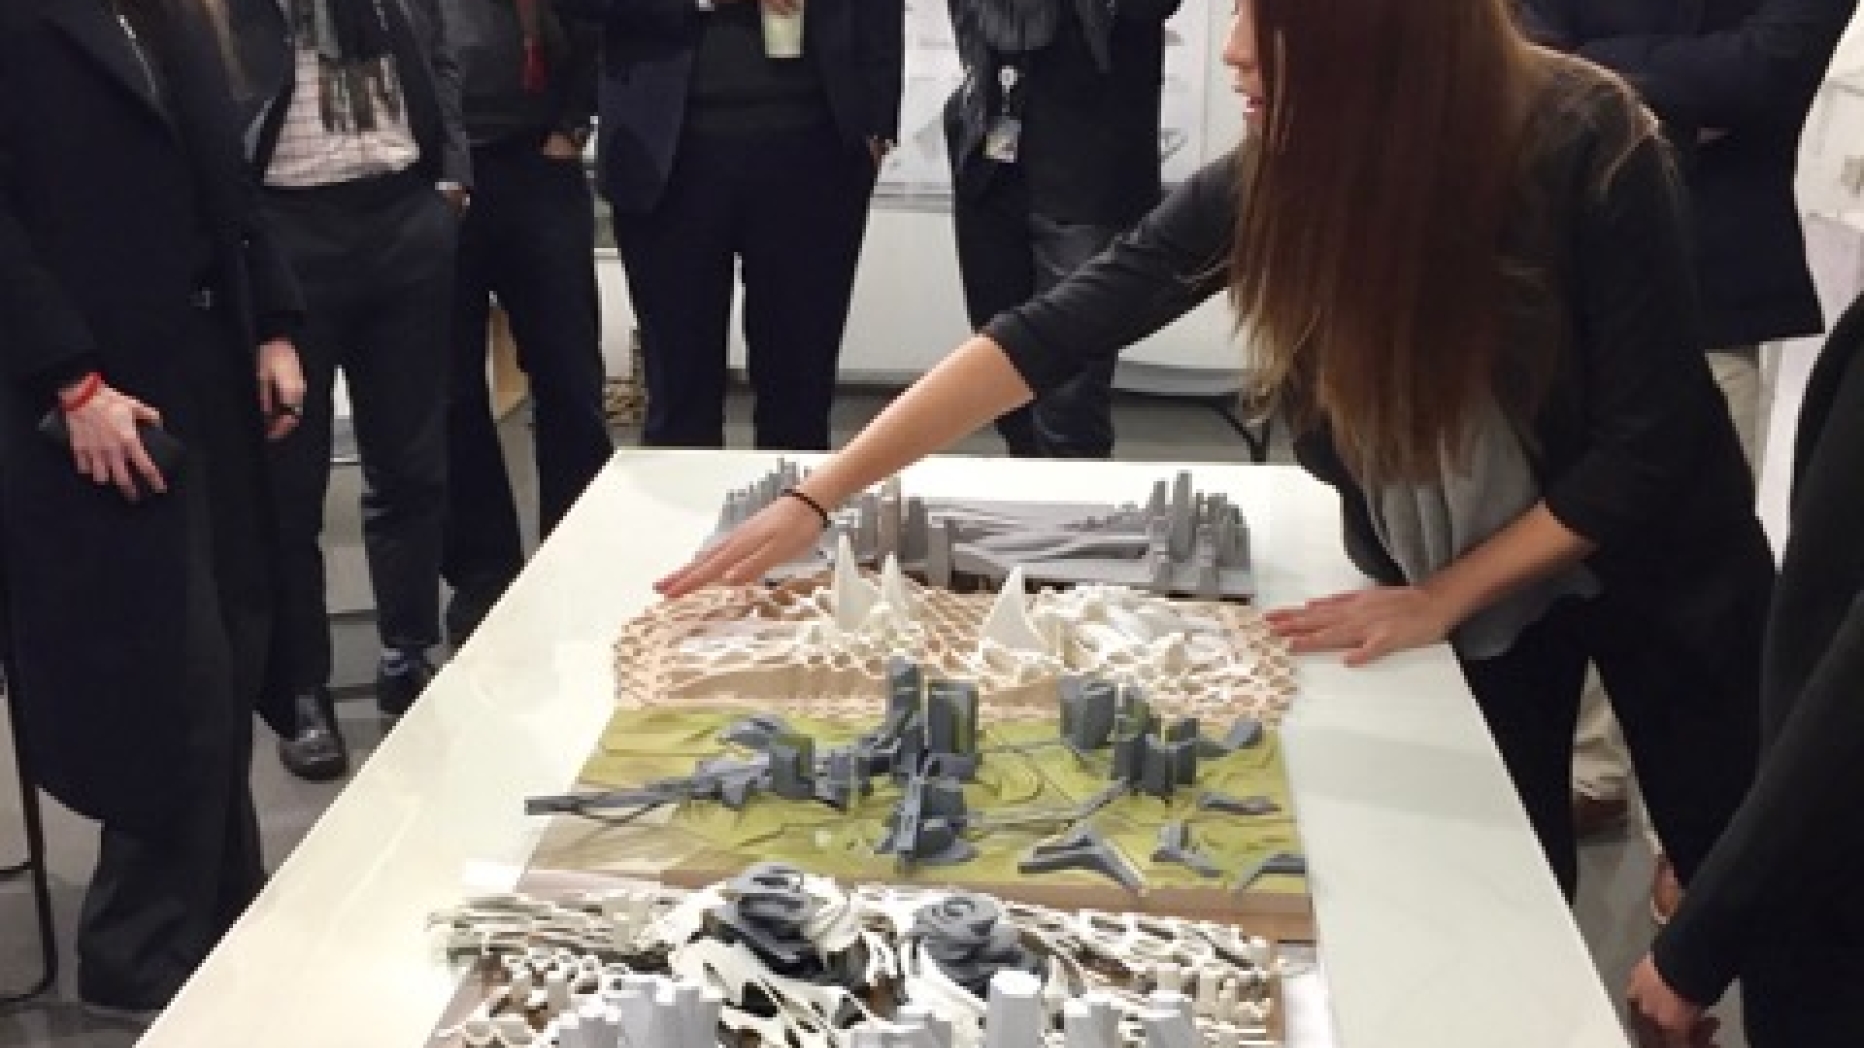 Student showing work to a group that resembles a series of architectural models.